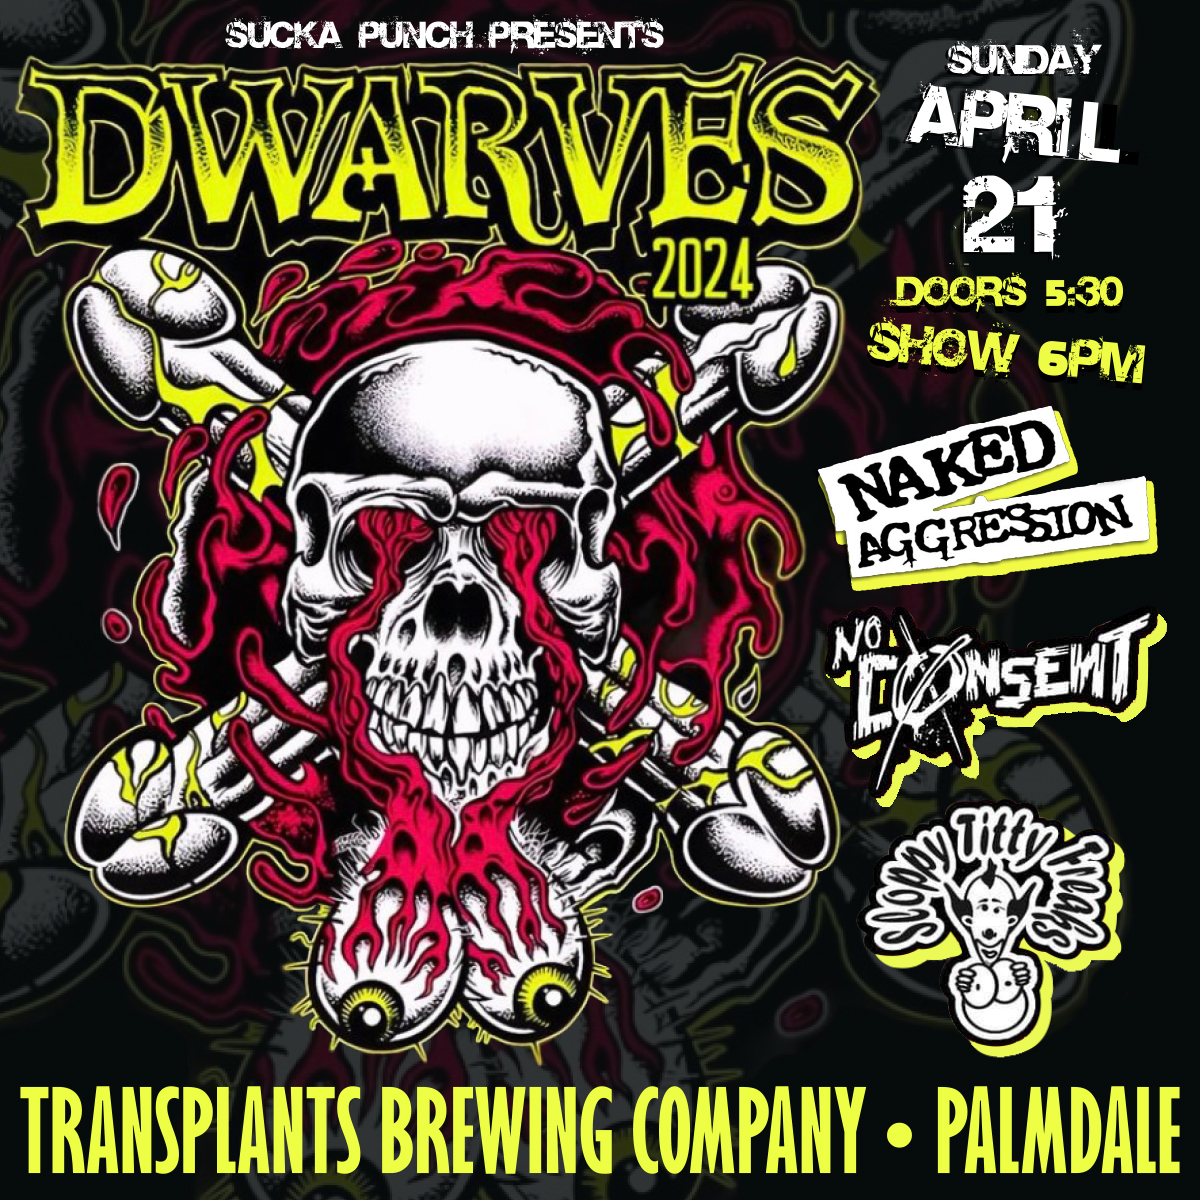 #Socal get ready to rock 🎸 Sucka Punch Events is bringing a legendary punk rock show to @TransplantsBrew featuring @thedwarvesband, Naked Aggression Band, No Consent Band and Sloppy Titty Freaks and food by Ma Dukes food truck you'll leave satisfied in more ways than one .